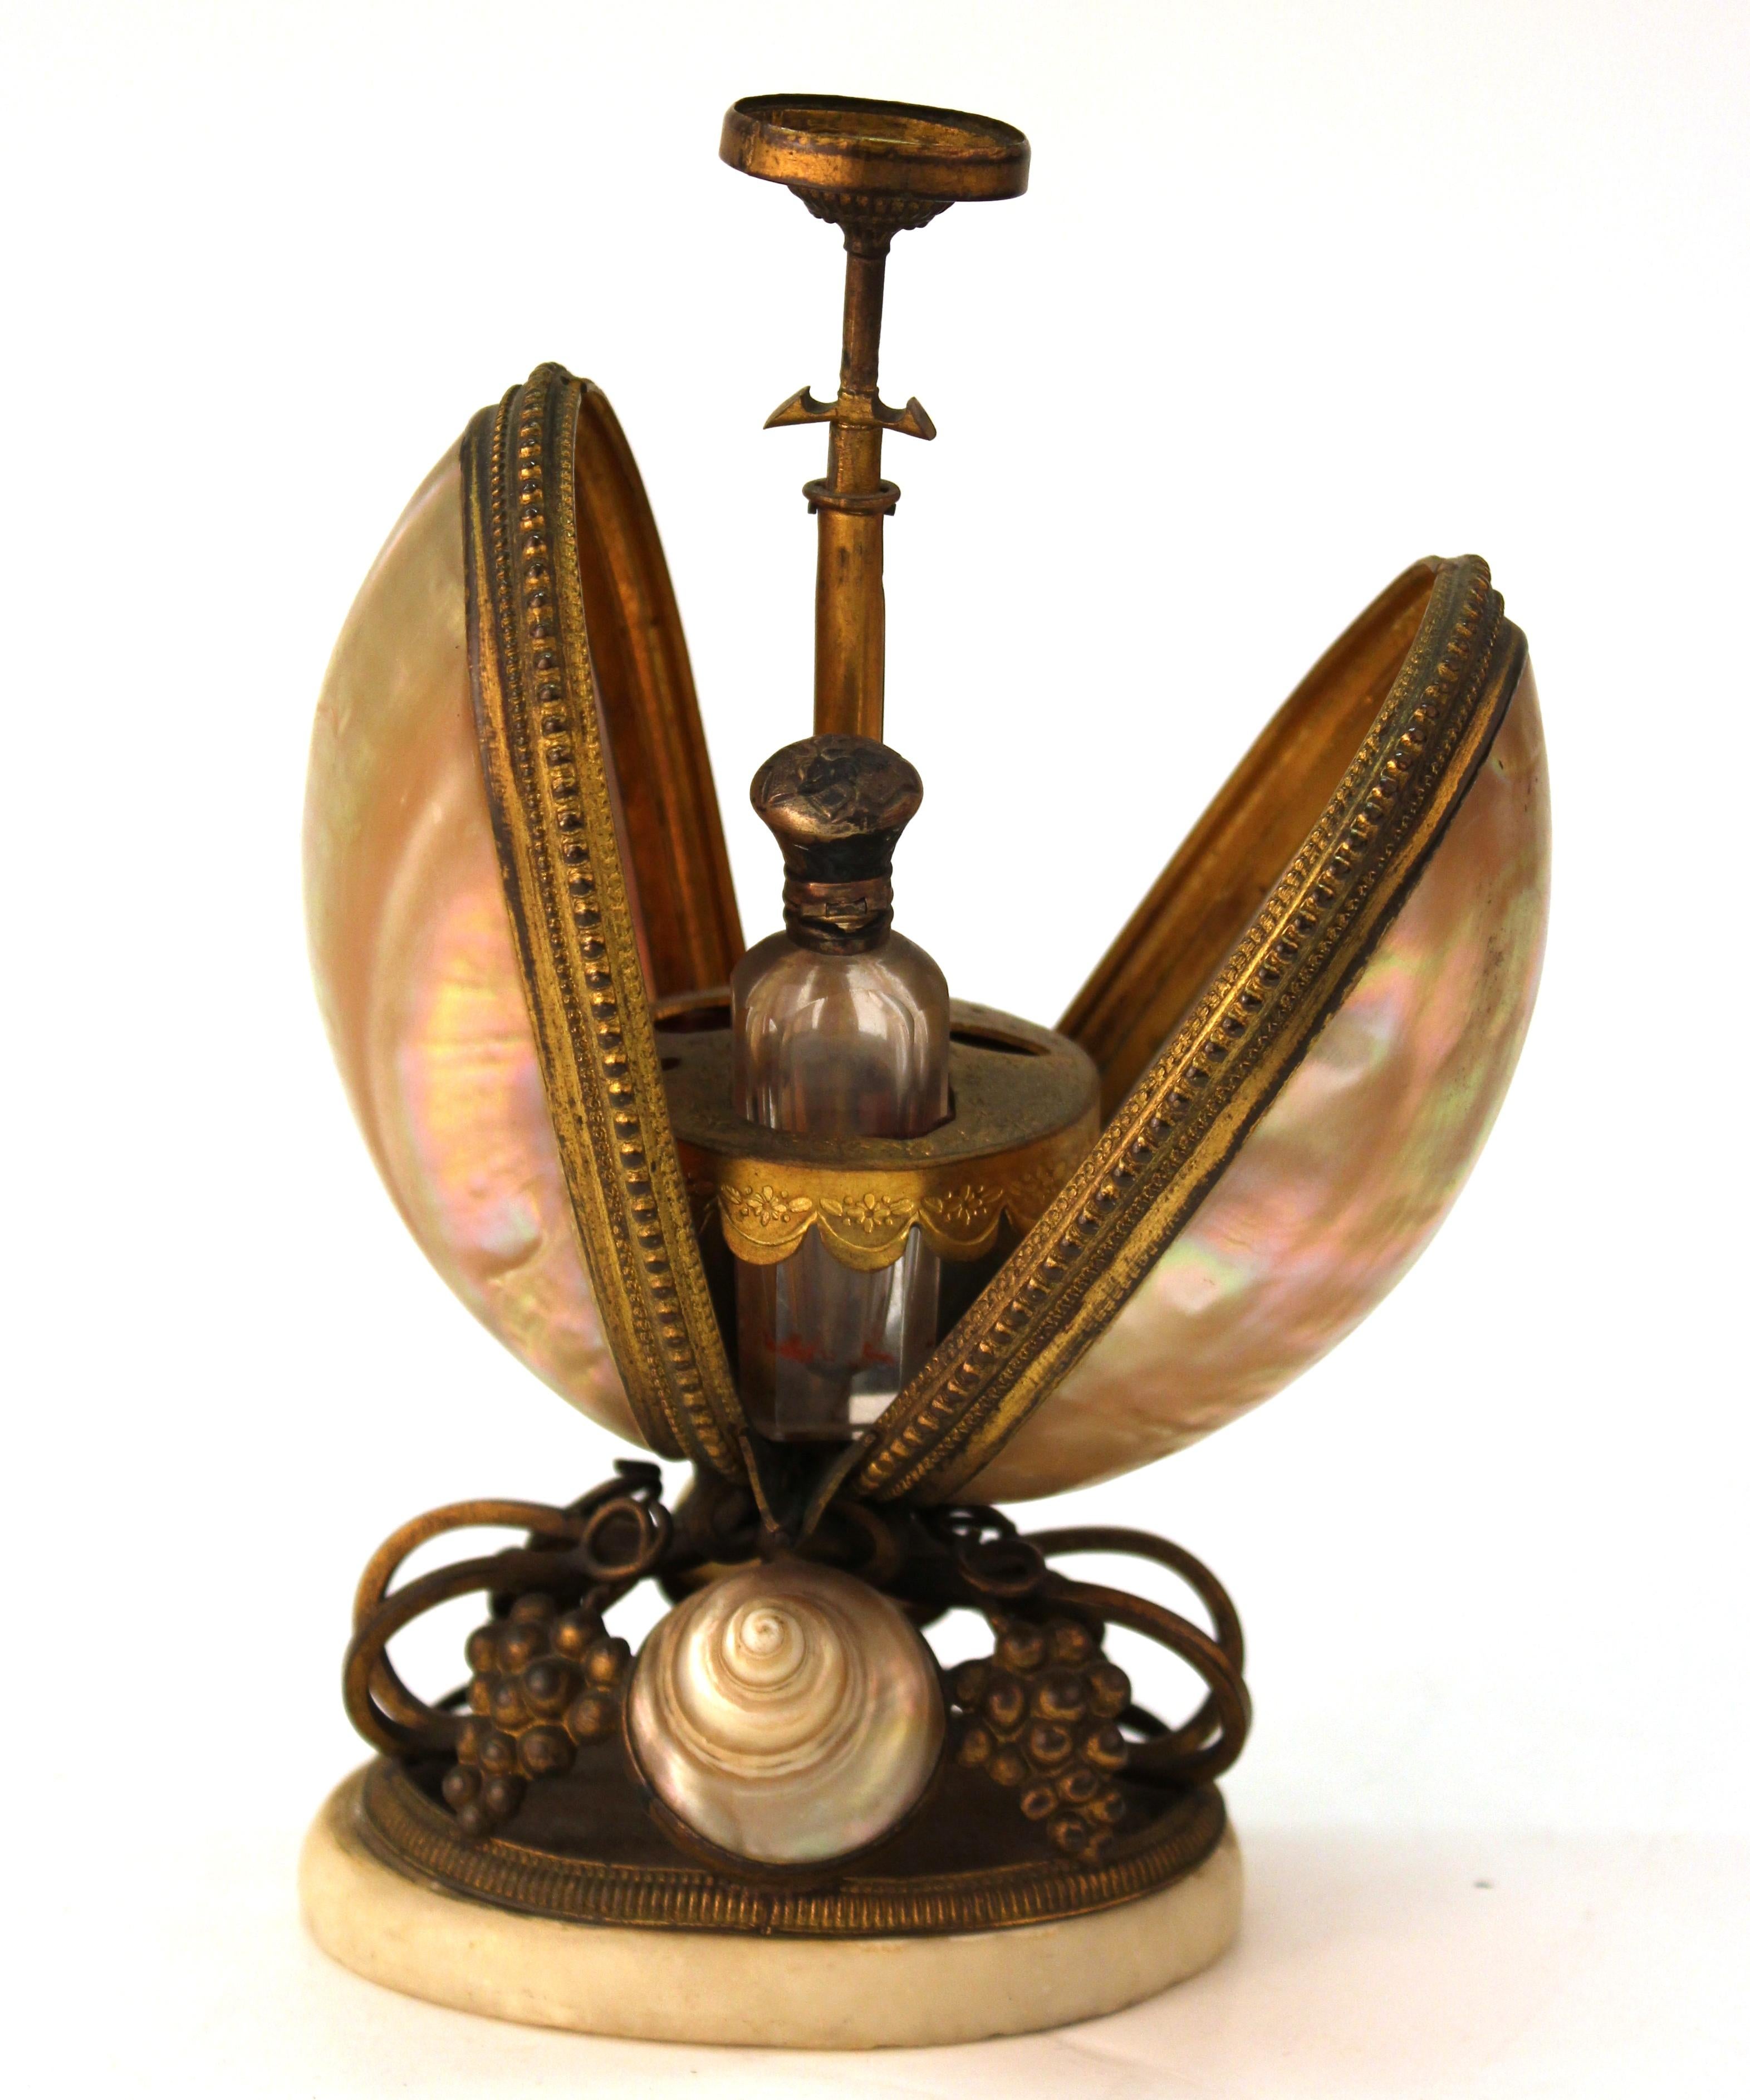 French nautilus shell and ormolu gilt metal mounted egg-shaped mechanical holder, with the egg opening and revealing a perforated stand housing an antique perfume or smelling salts bottle. The piece is lacking the top shell and some interior